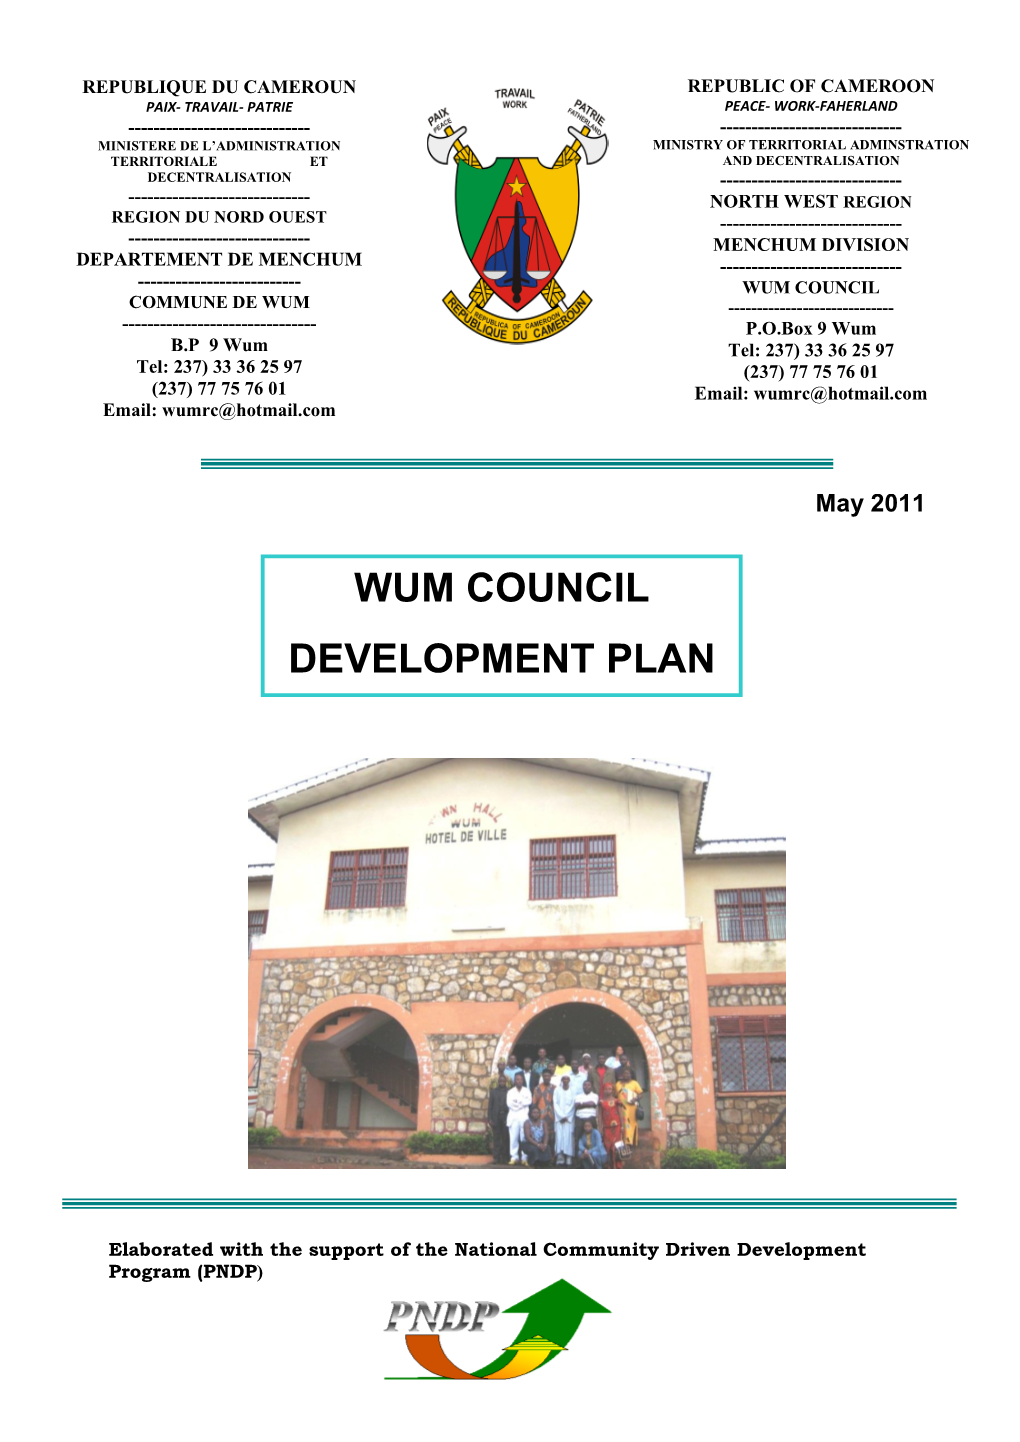 Wum Council Development Plan After Signing the Contract to Undertake the Mission